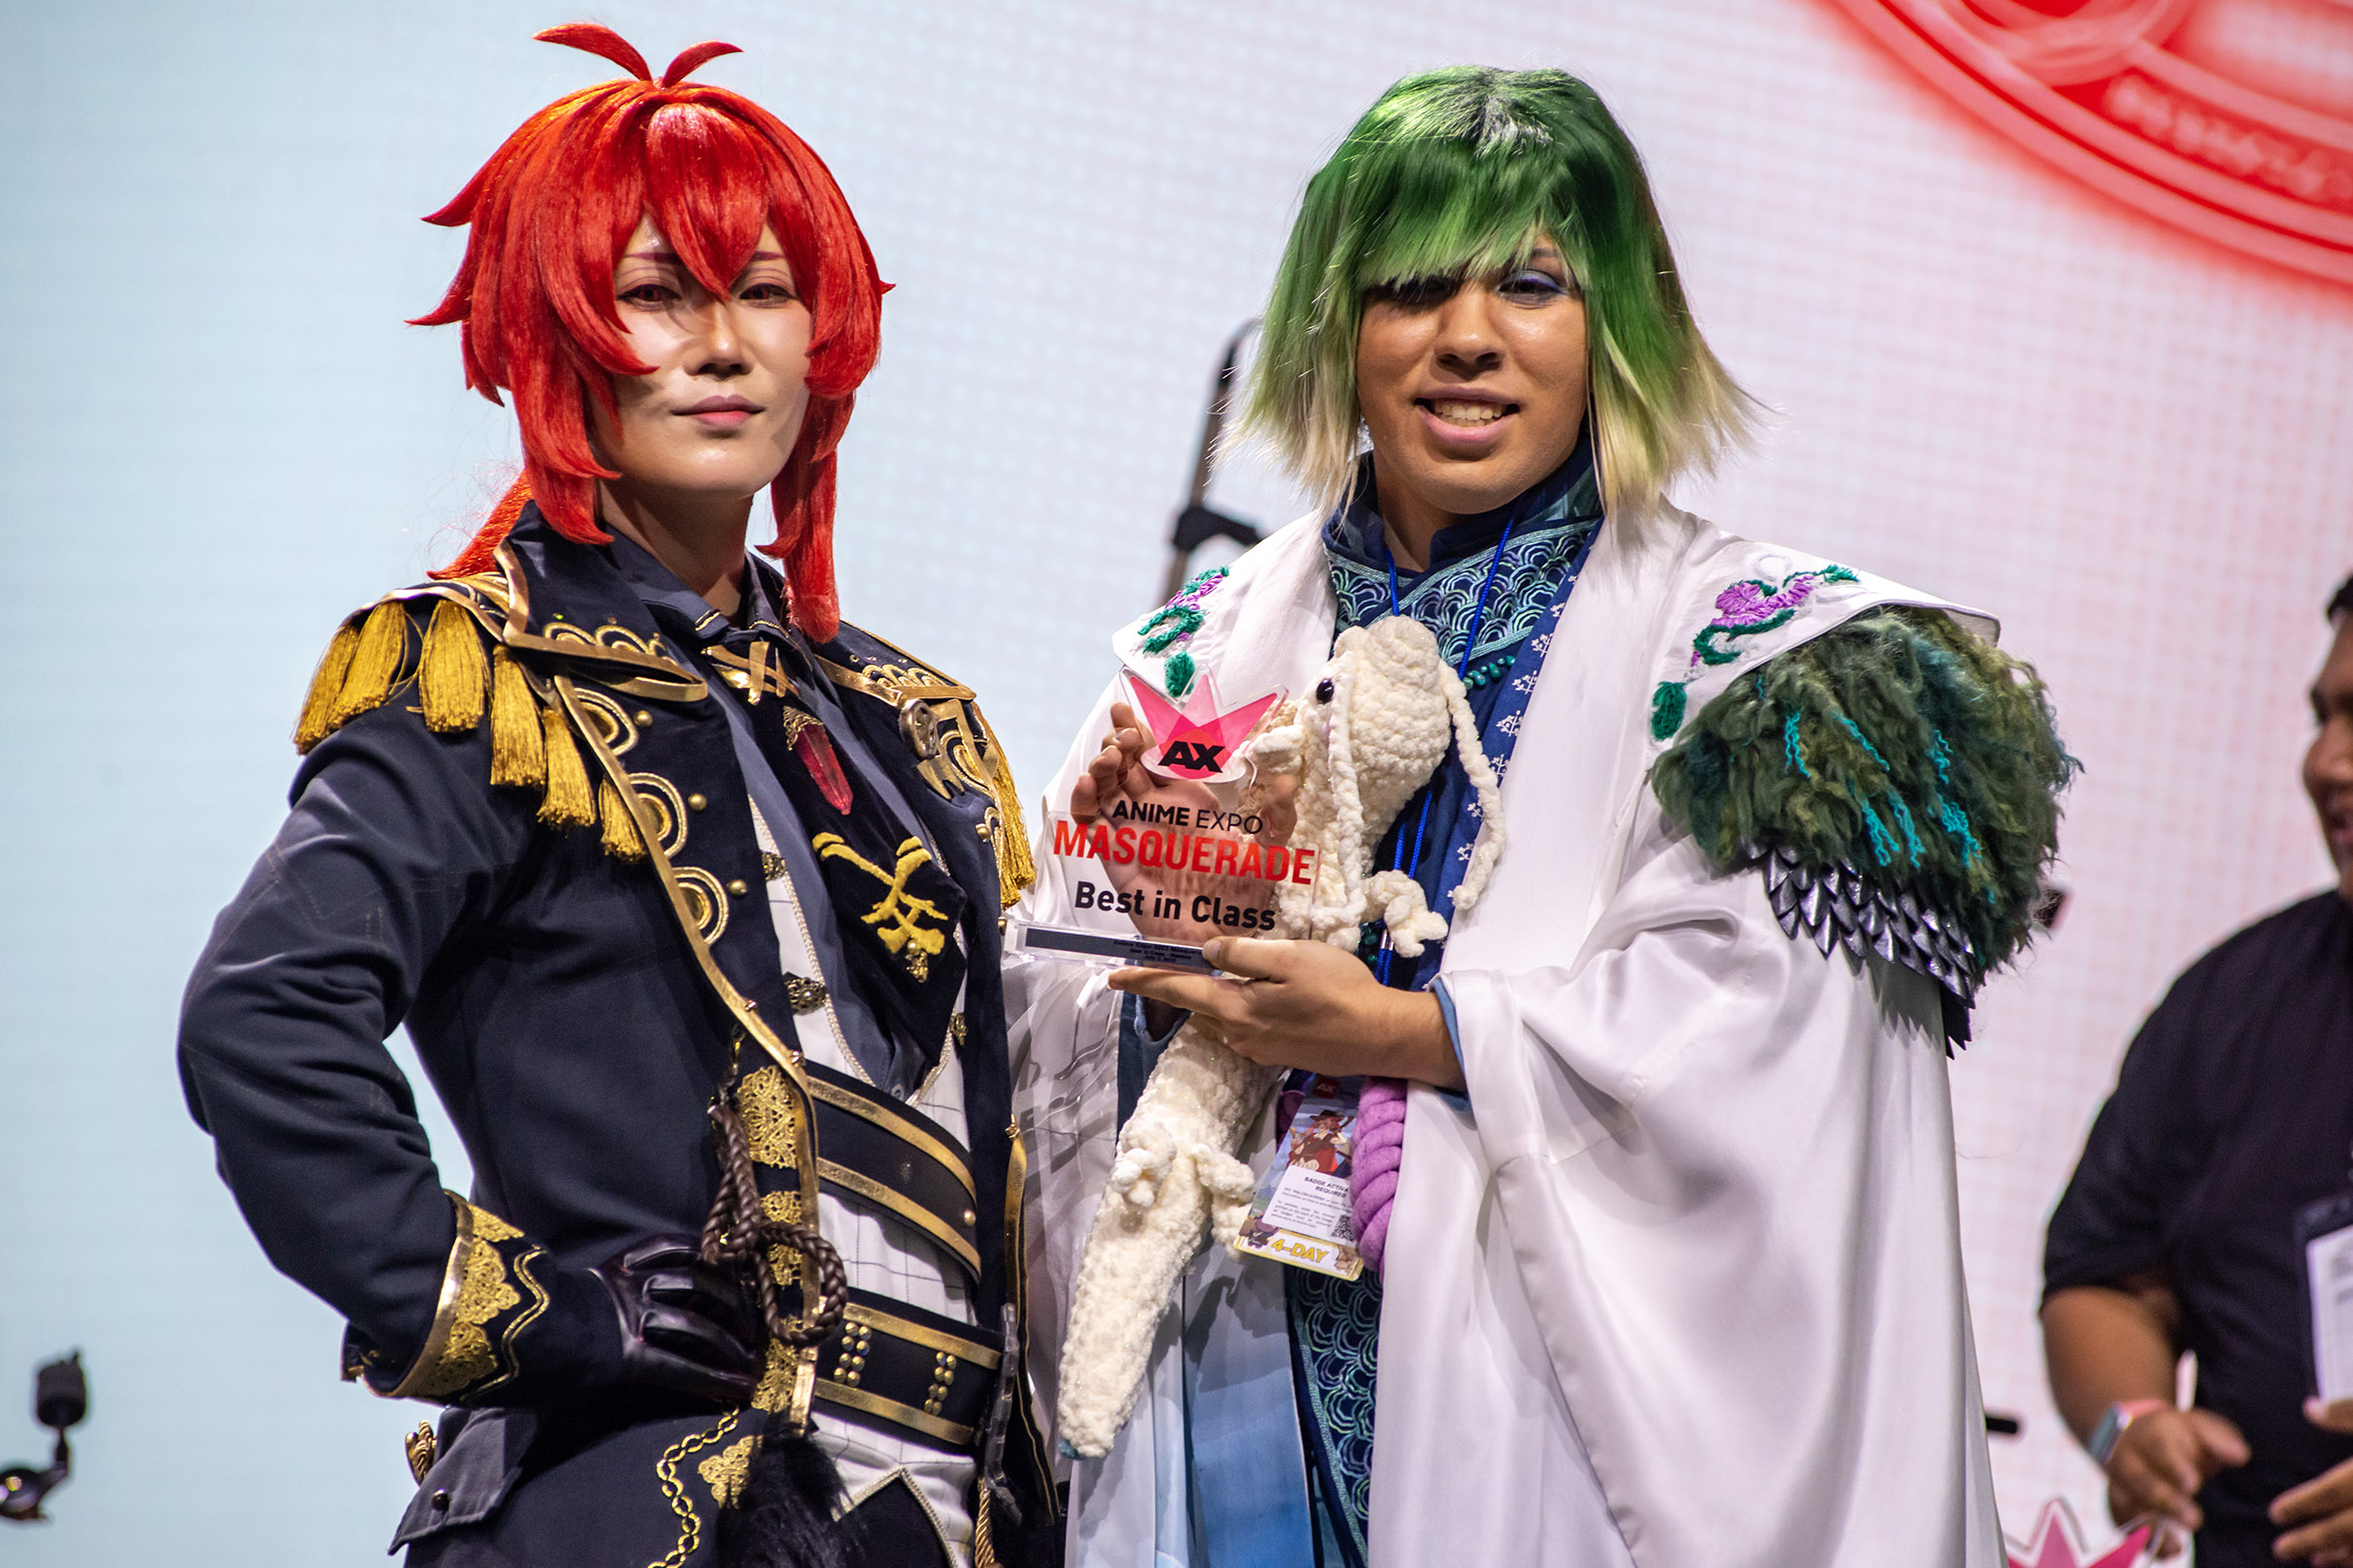 NTT Solmare's Shall we date? Series Attend Anime Expo 2019 in Los Angeles |  Business Wire